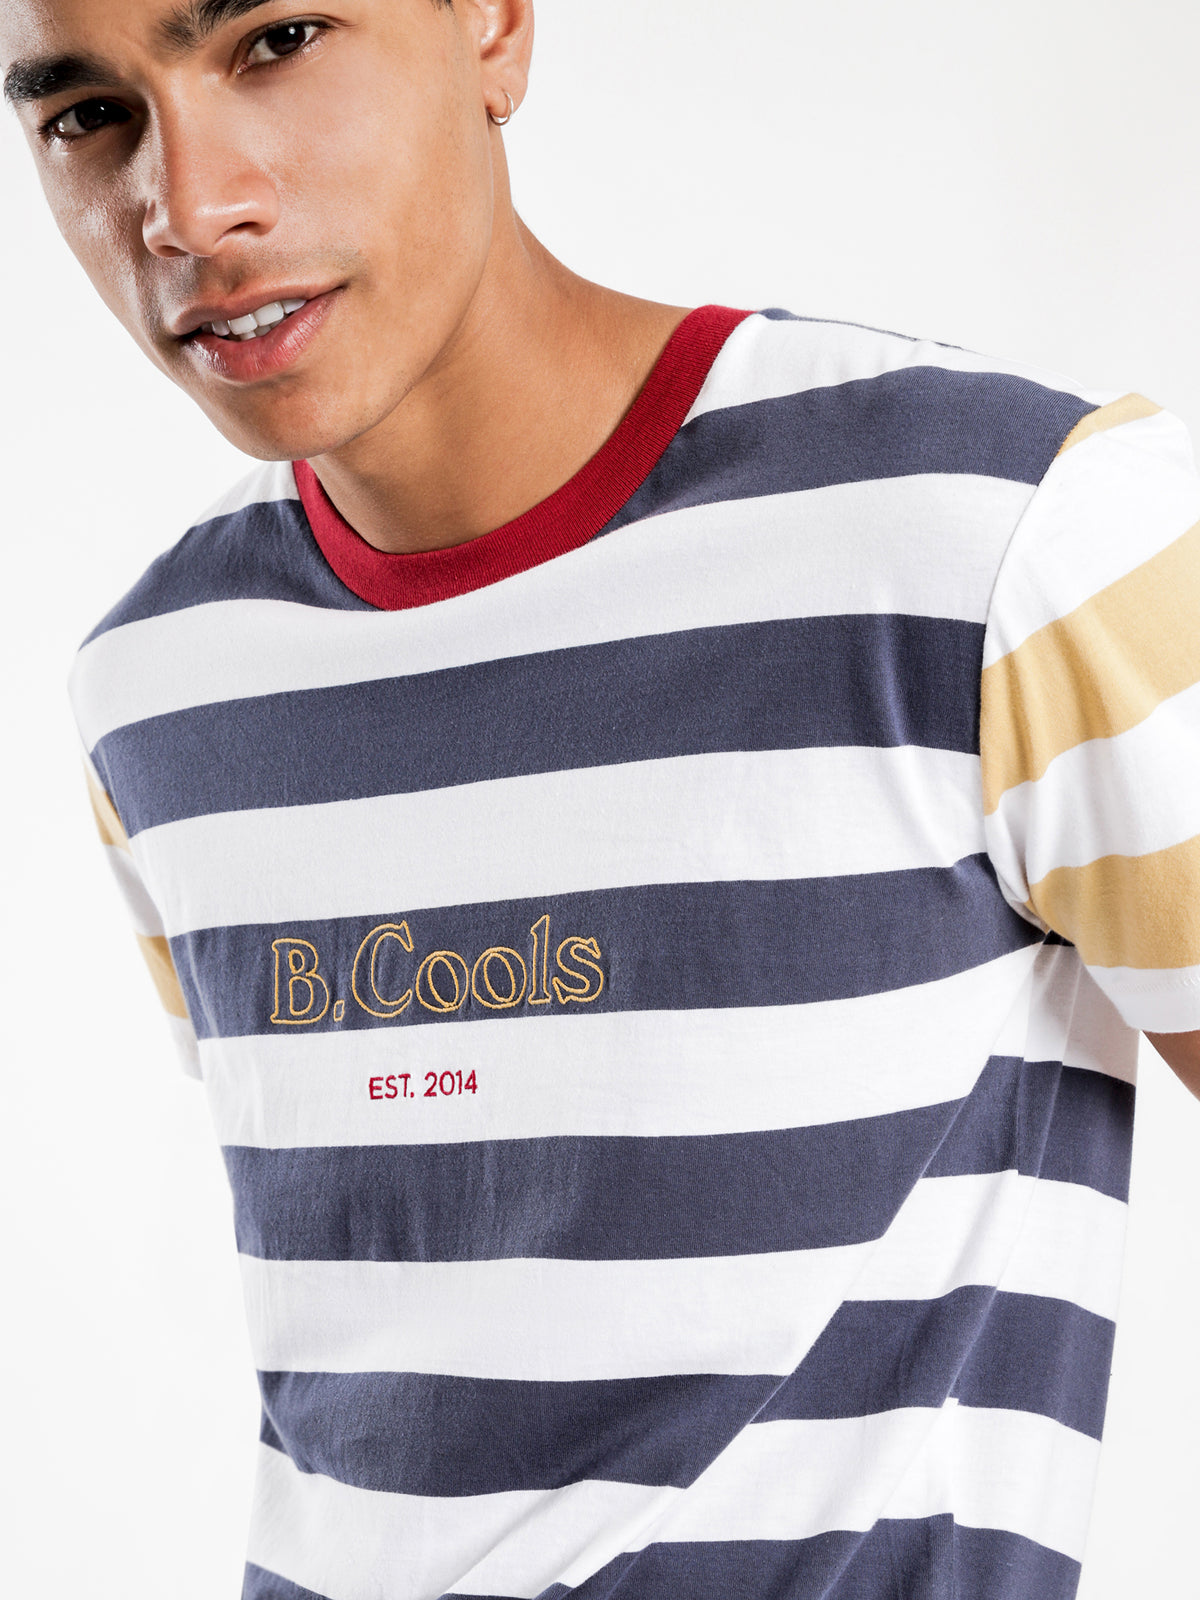 B Cools Heritage T-Shirt in Navy Stripe